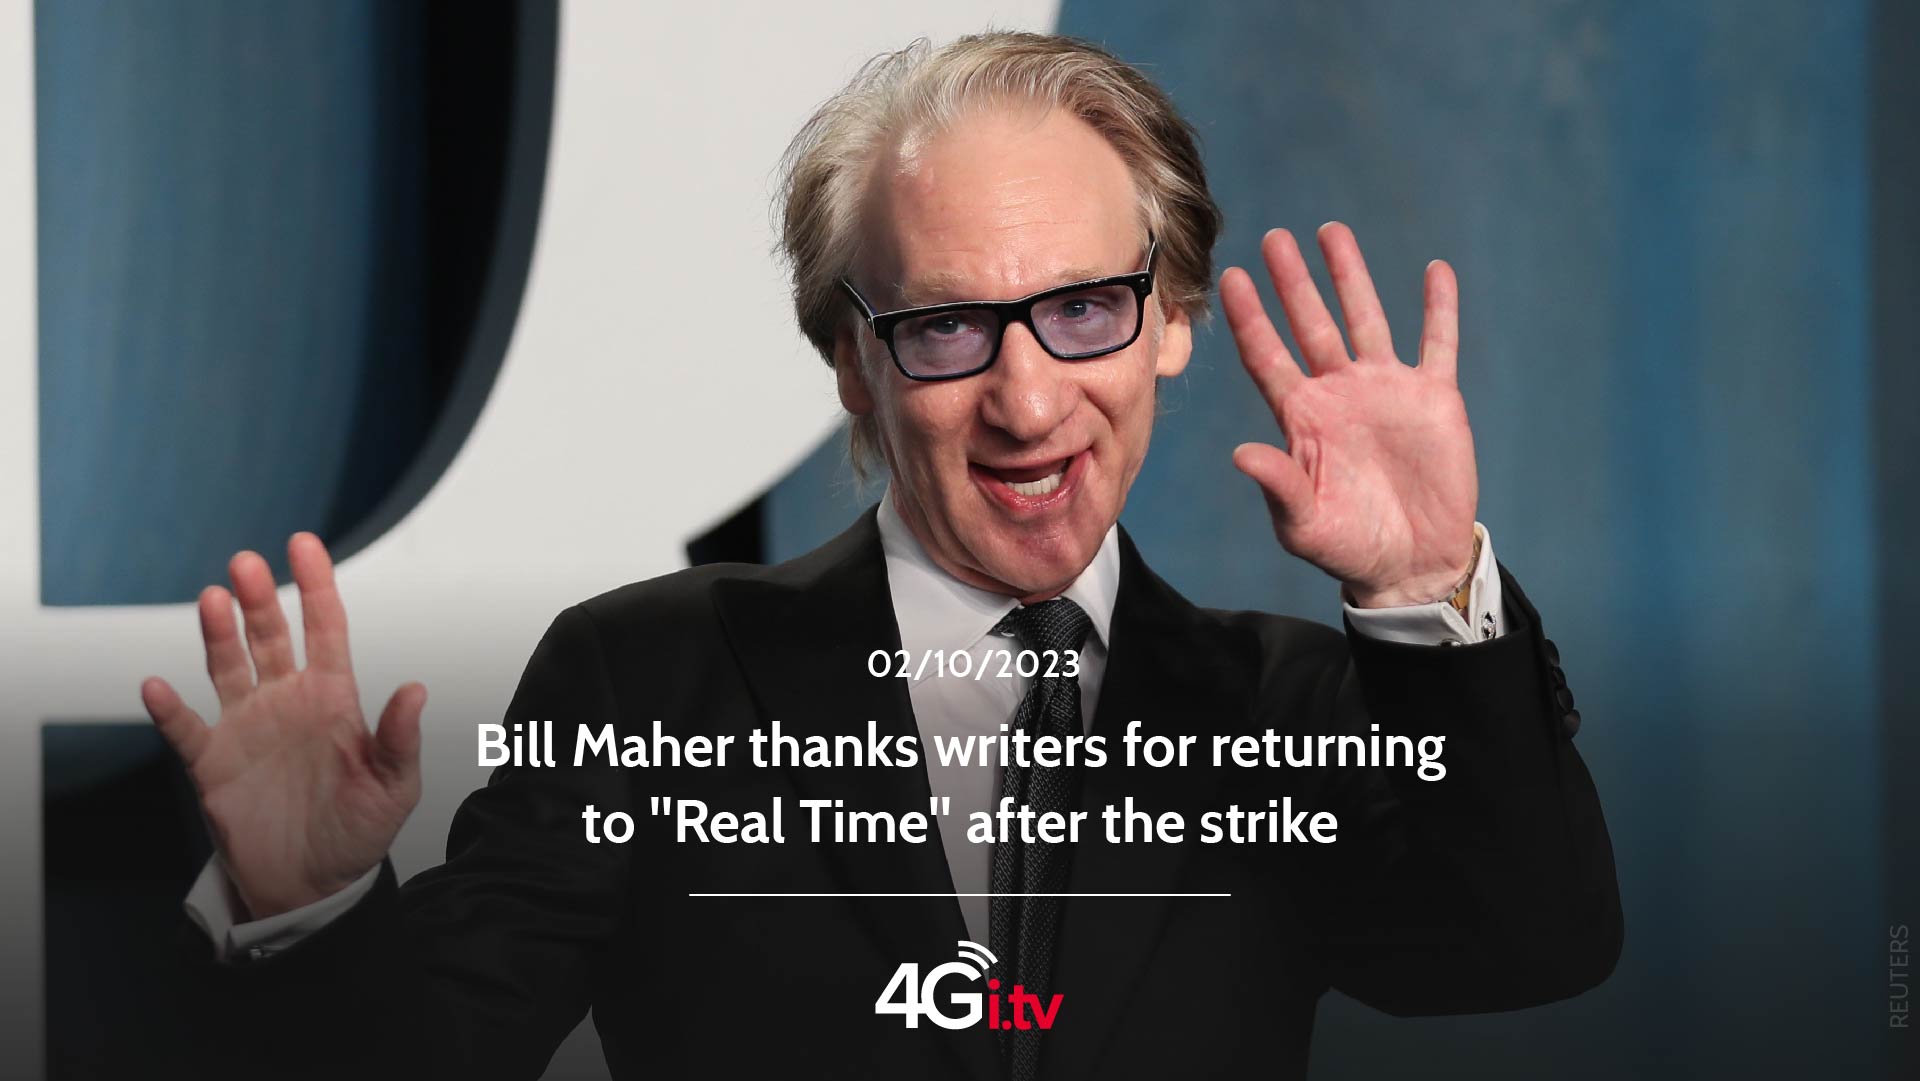 Подробнее о статье Bill Maher thanks writers for returning to “Real Time” after the strike